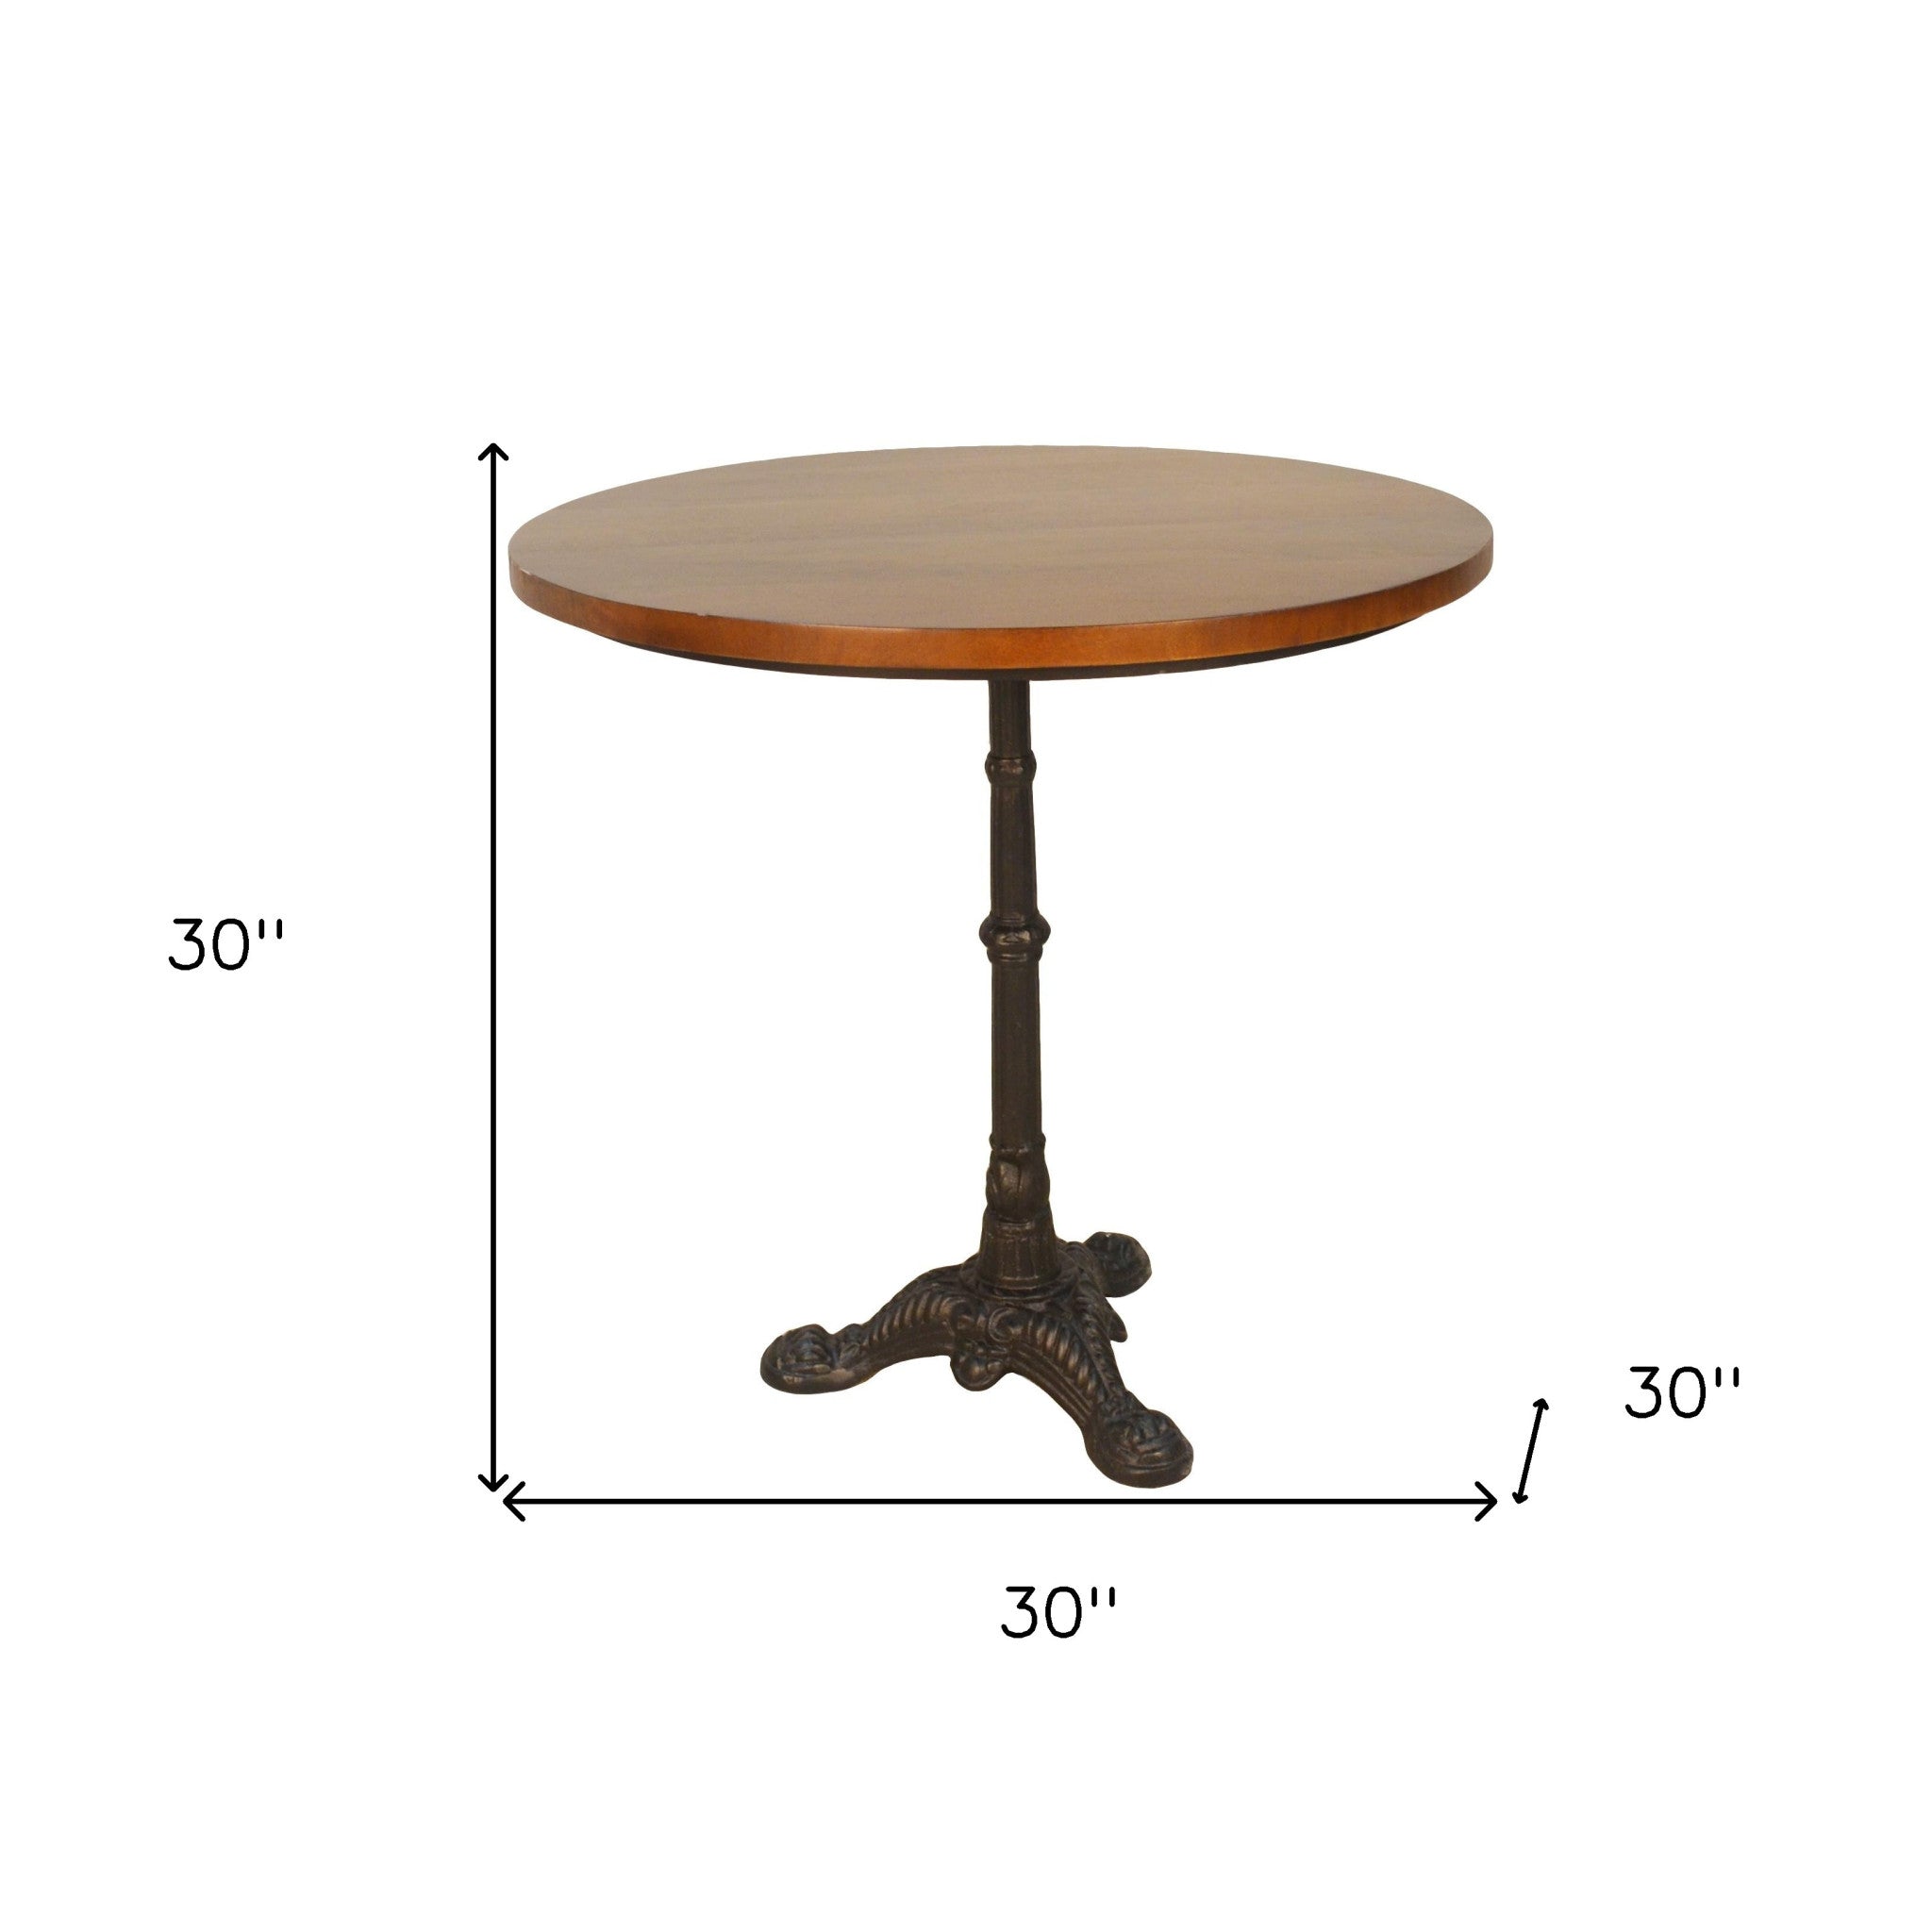 30" Chestnut and Black Rounded Solid Wood and Iron Dining Table